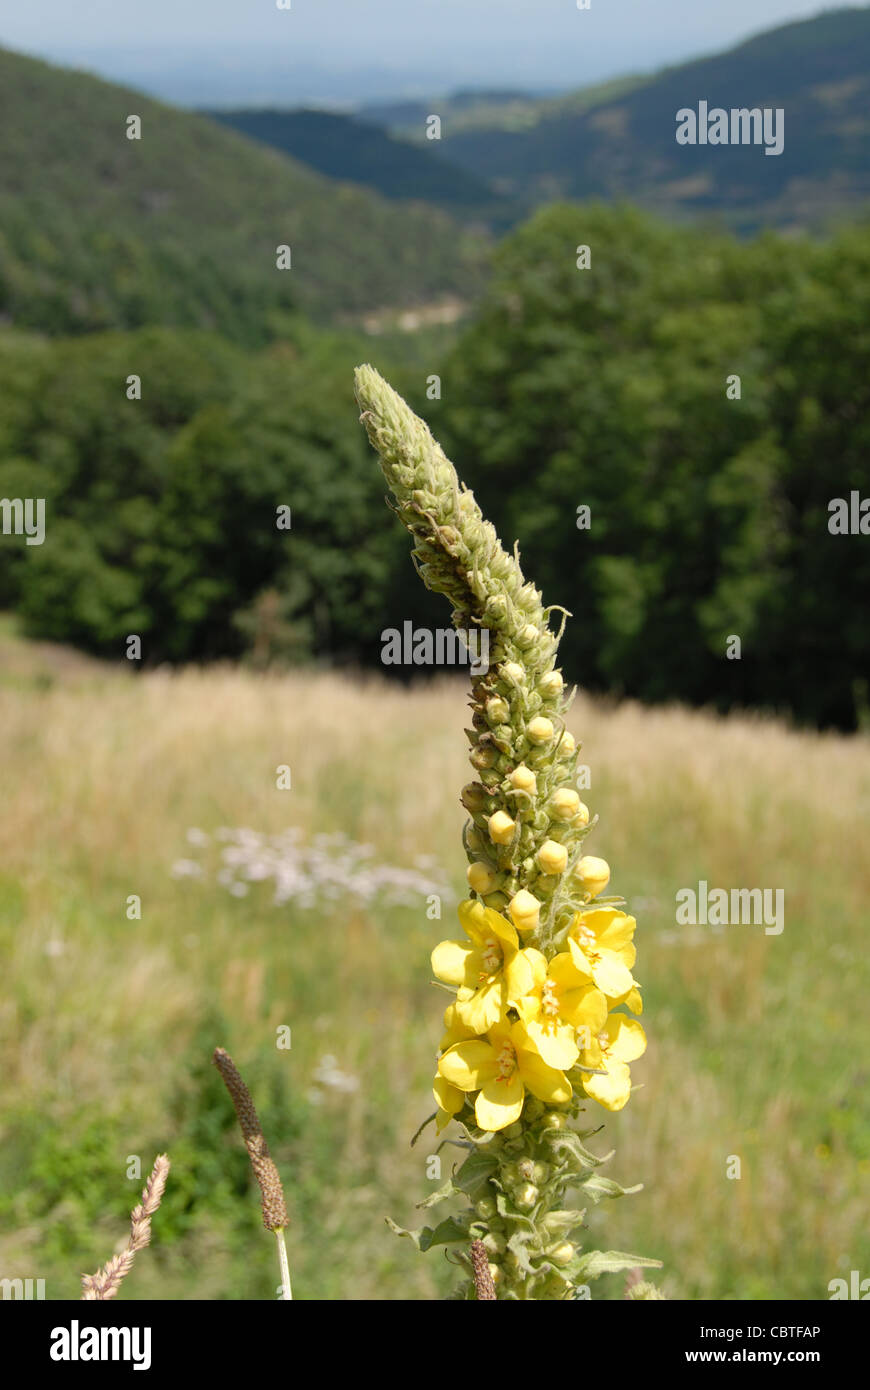 Common mullen or mullein flowering on a meadow in the Ard`che mountains in the Parc naturel regional des monts d'Ardèche Stock Photo